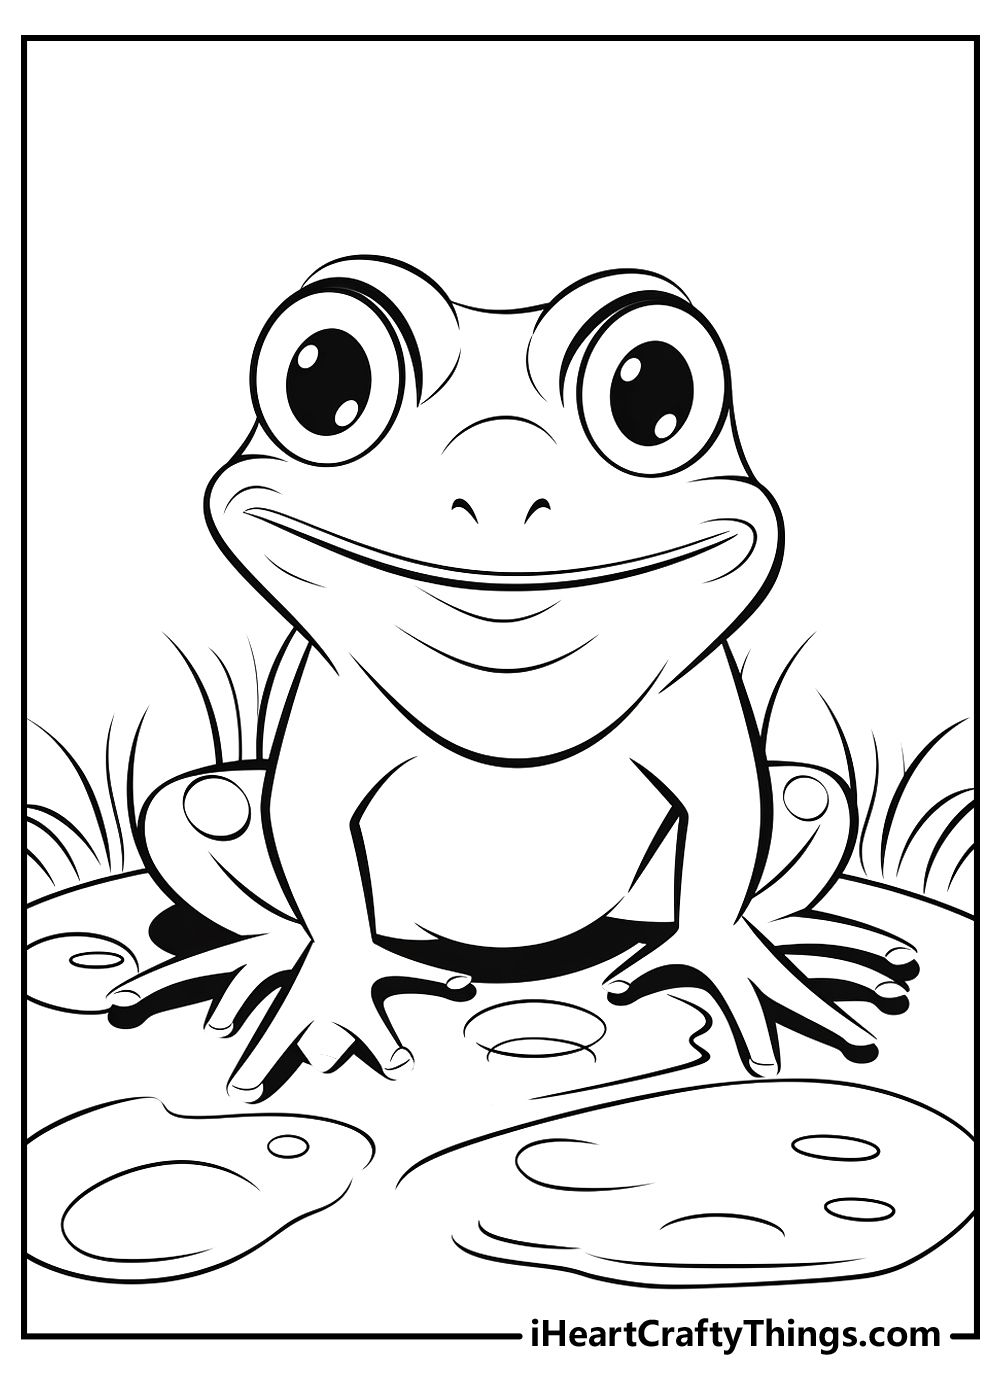 toad coloring sheet free download